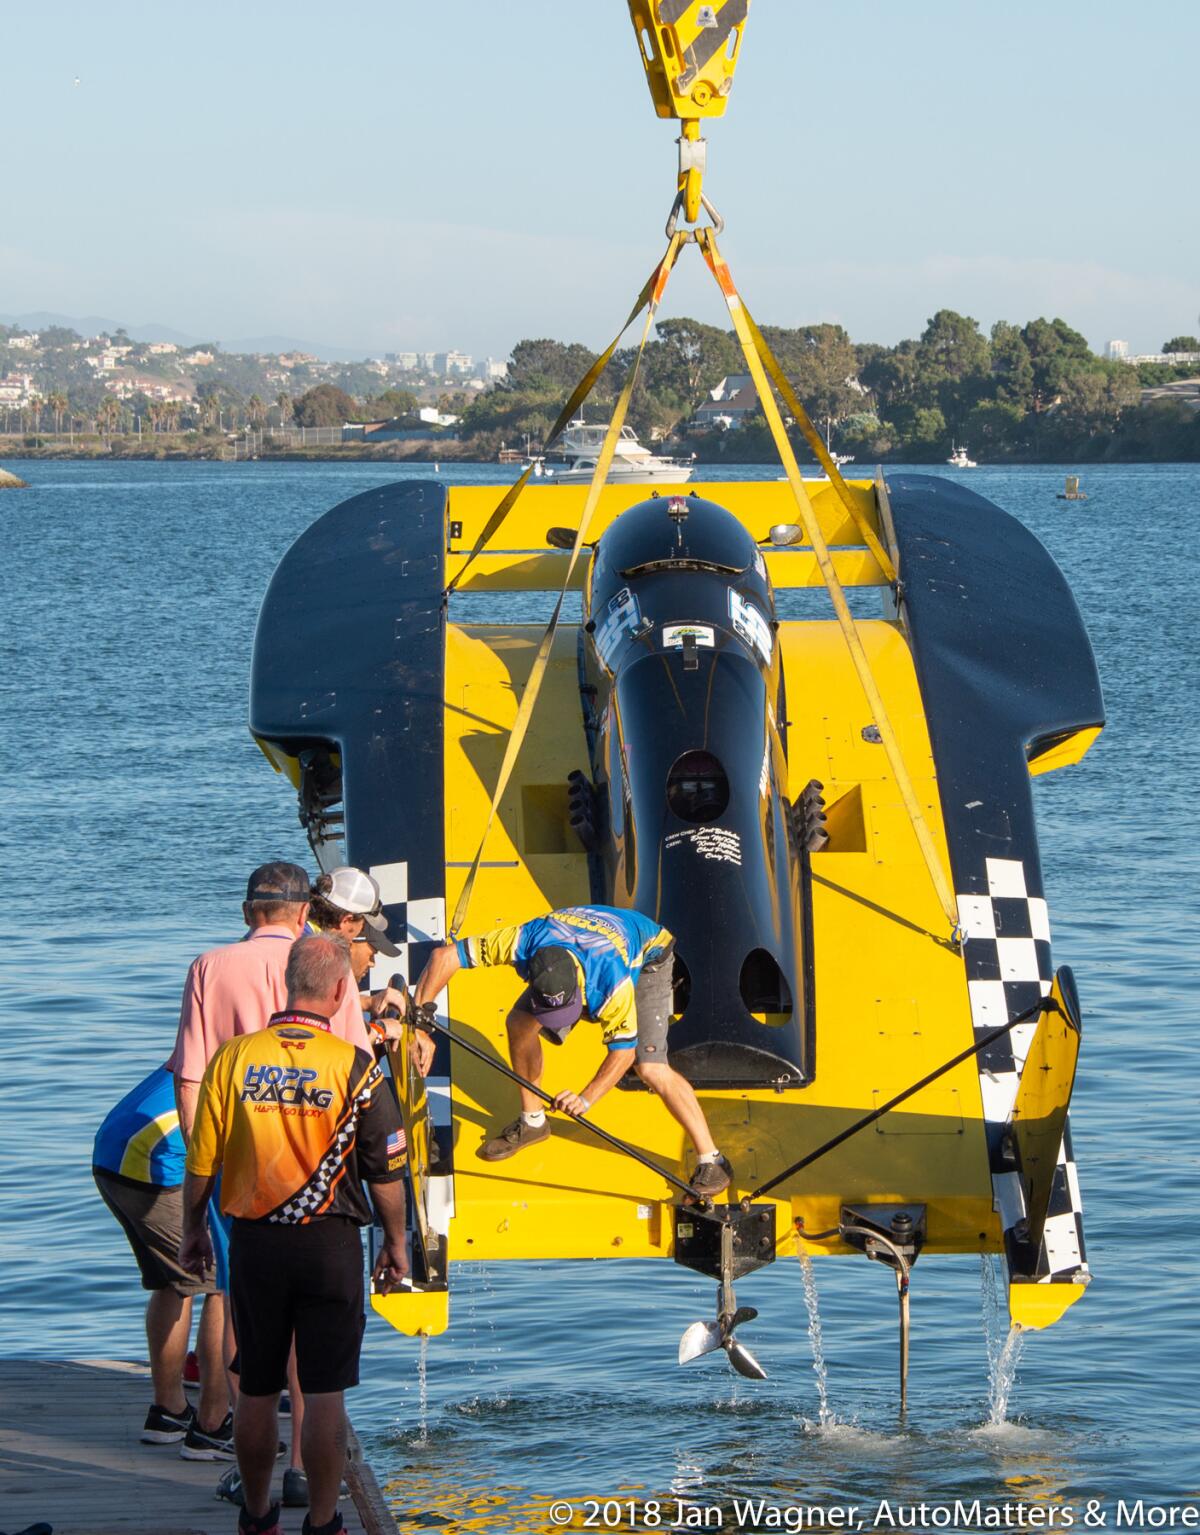 This hydroplane suffered a leak and took on water.